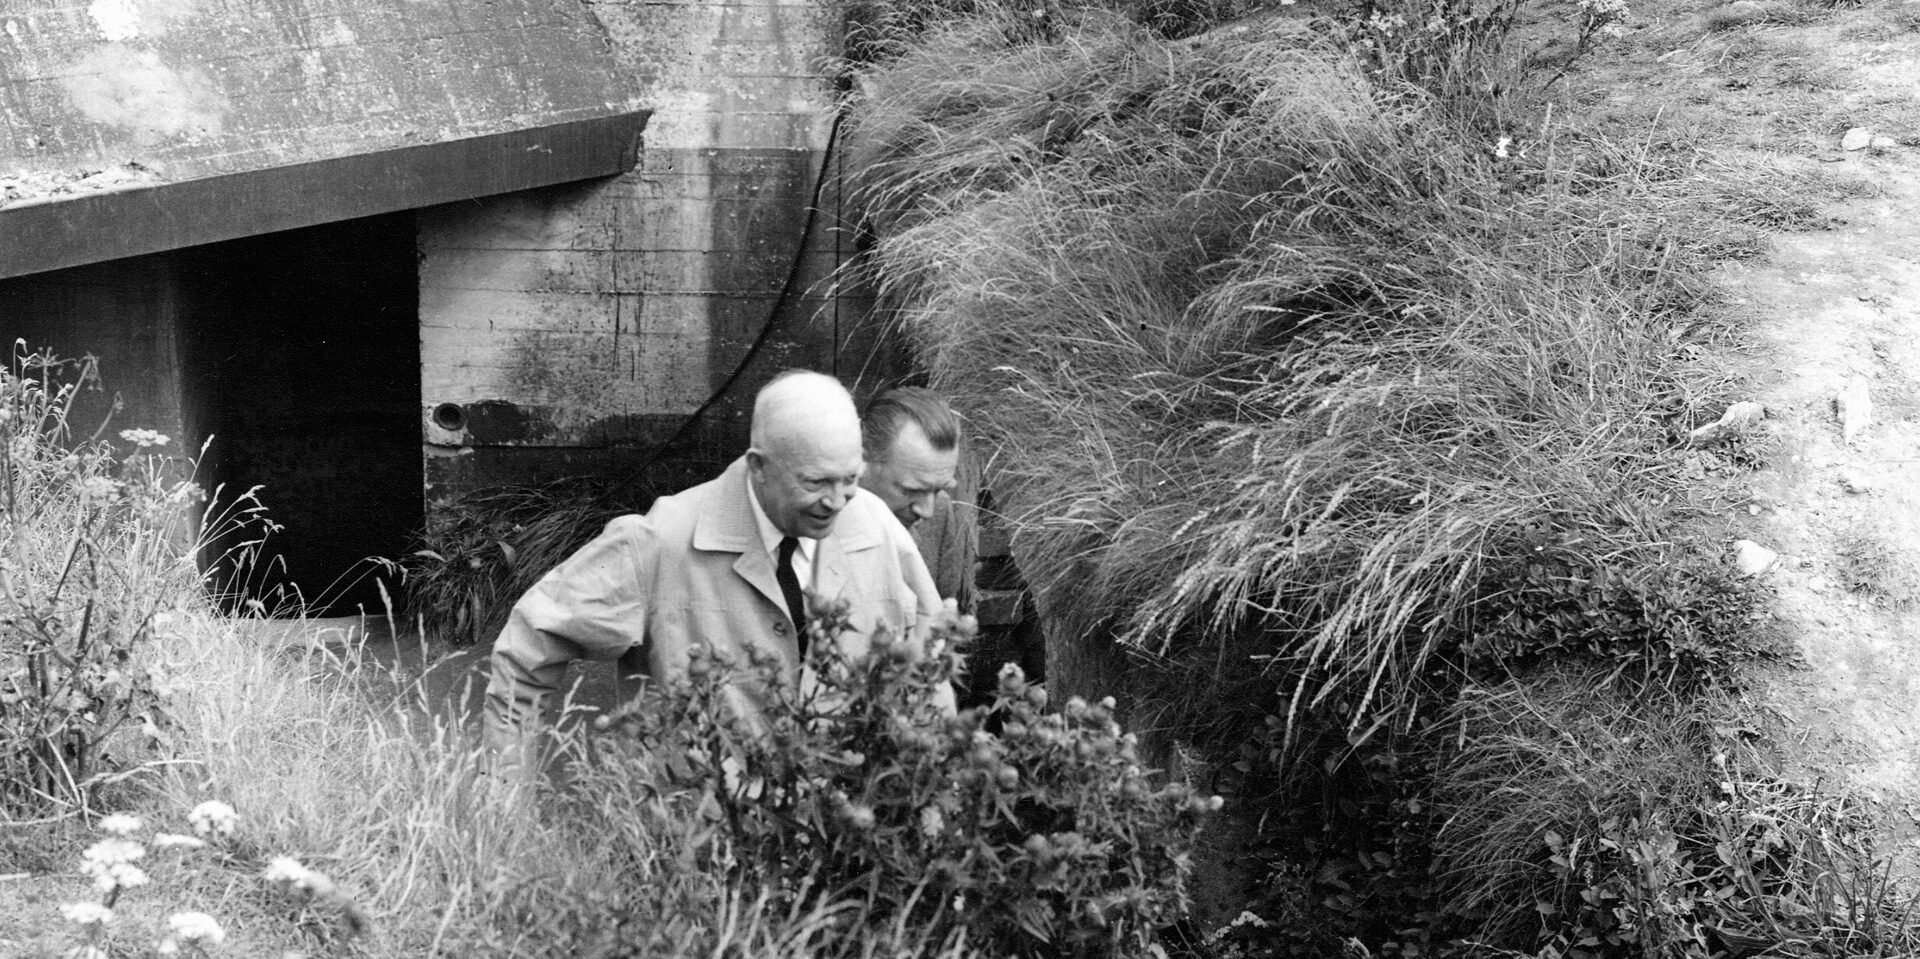 Cronkite and General Eisenhower tour German bunkers in Normandy after the war.